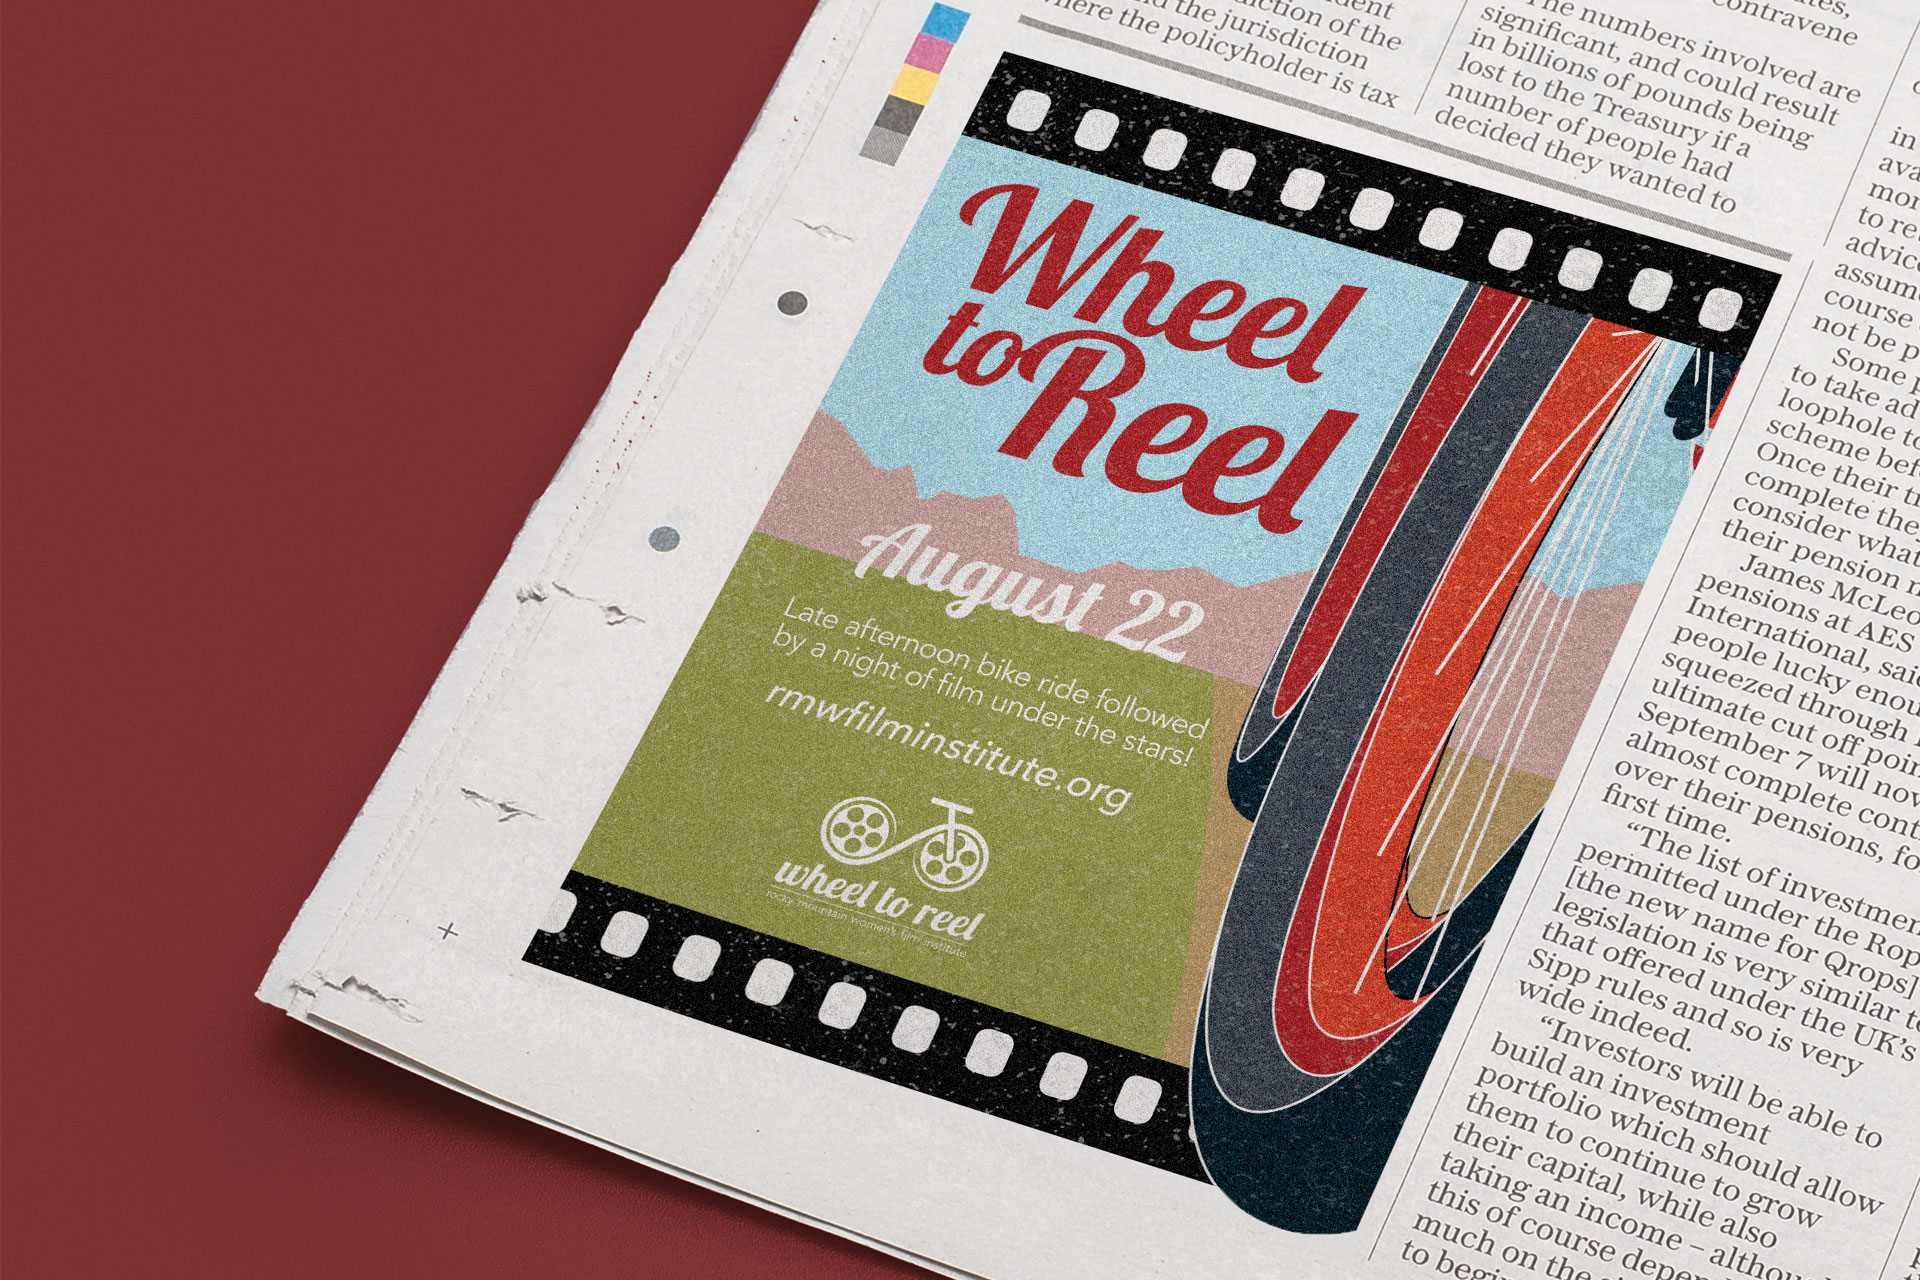 RMWFI Wheel to Reel Event Identity and Collateral – Print Advertising